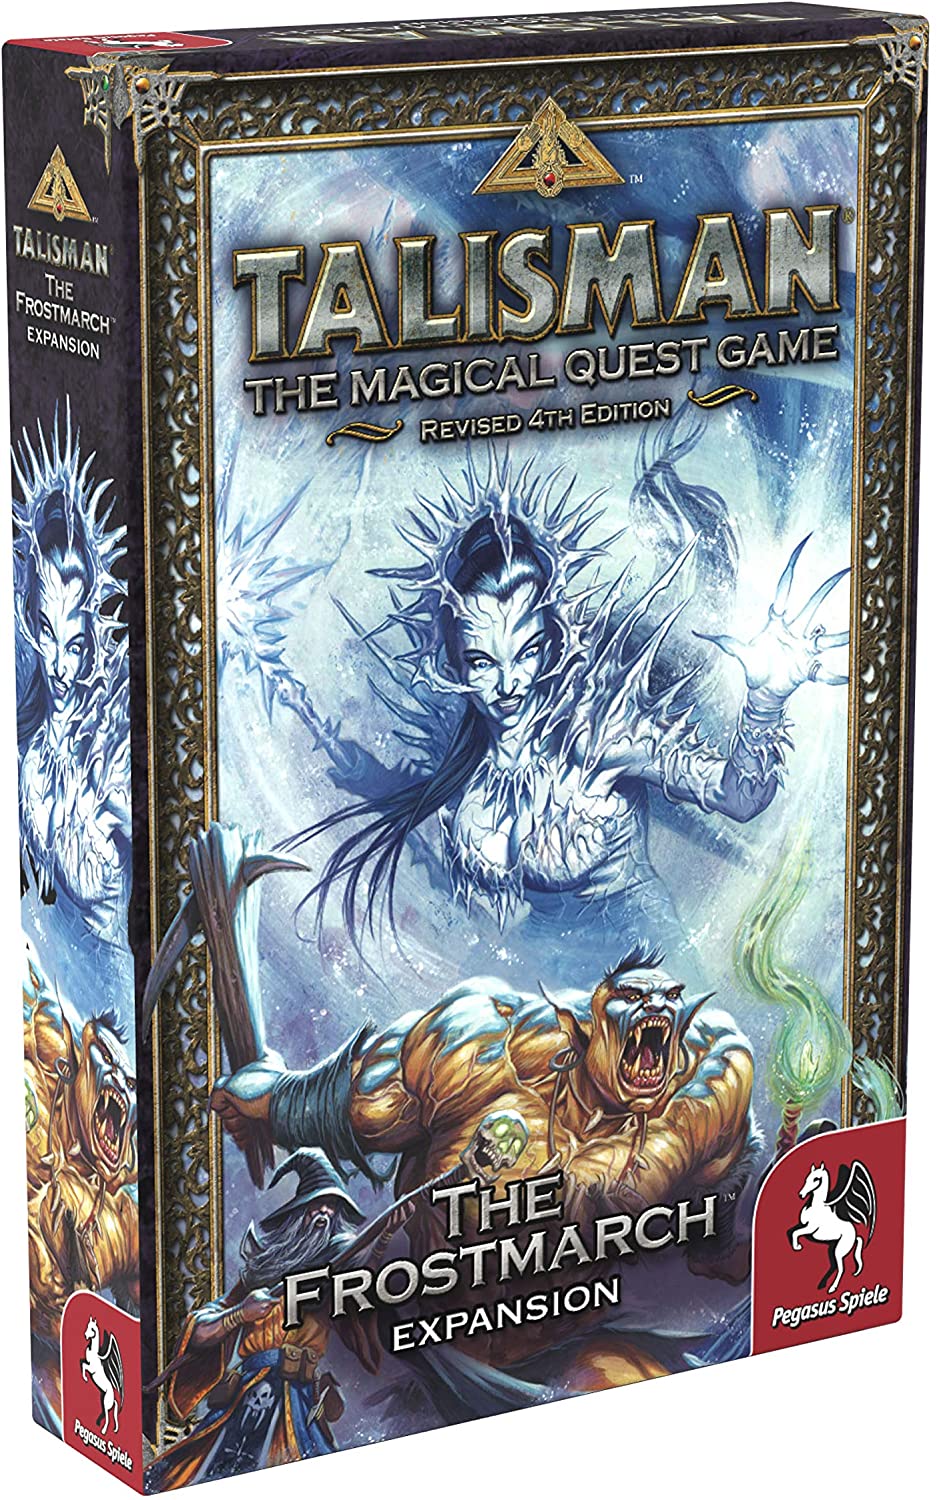 (BSG Certified USED) Talisman - The Frostmarch